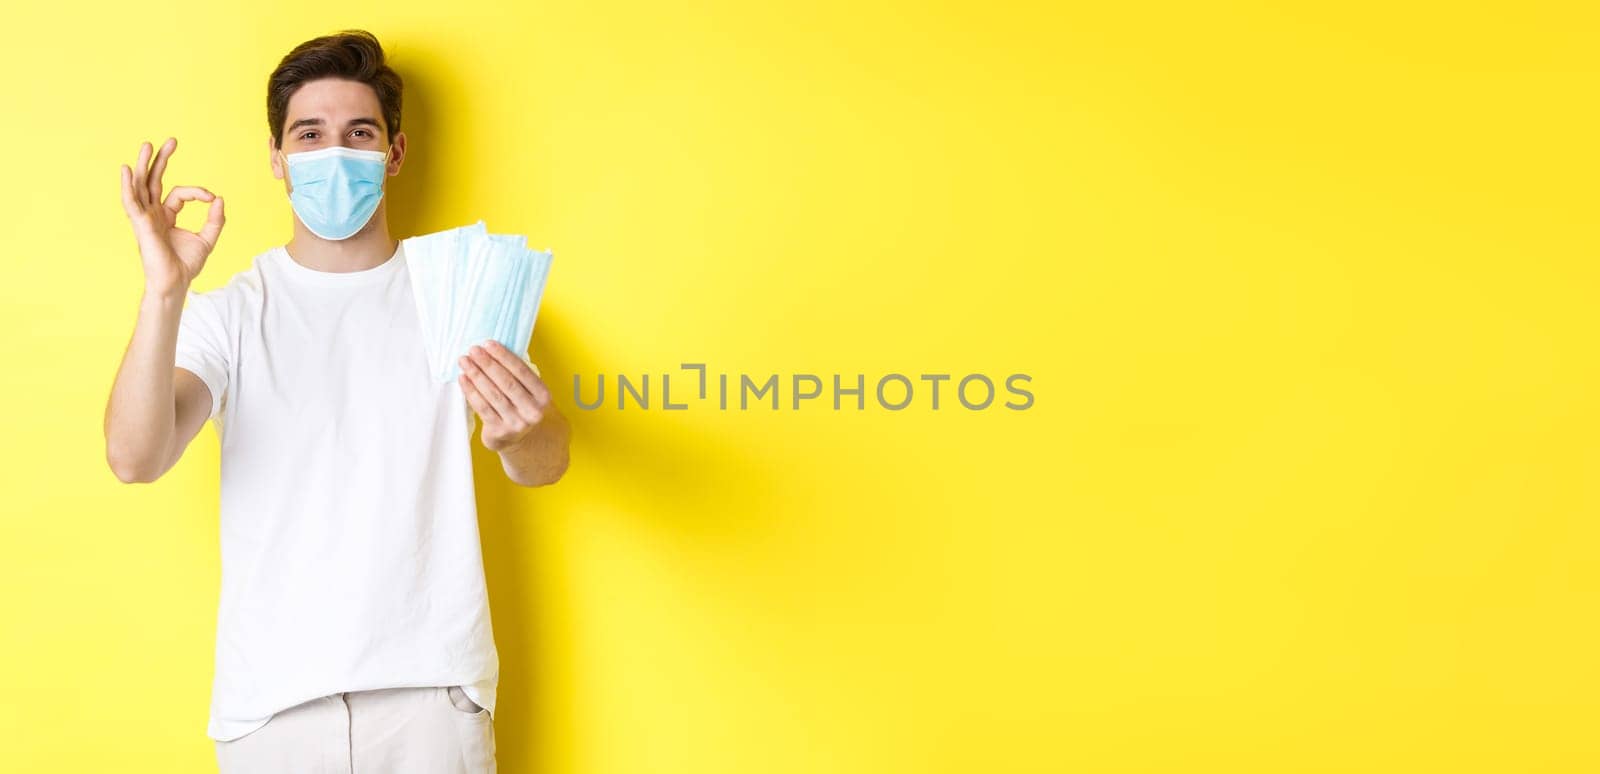 Concept of covid-19, quarantine and preventive measures. Satisfied man showing okay sign and giving medical masks, standing over yellow background.